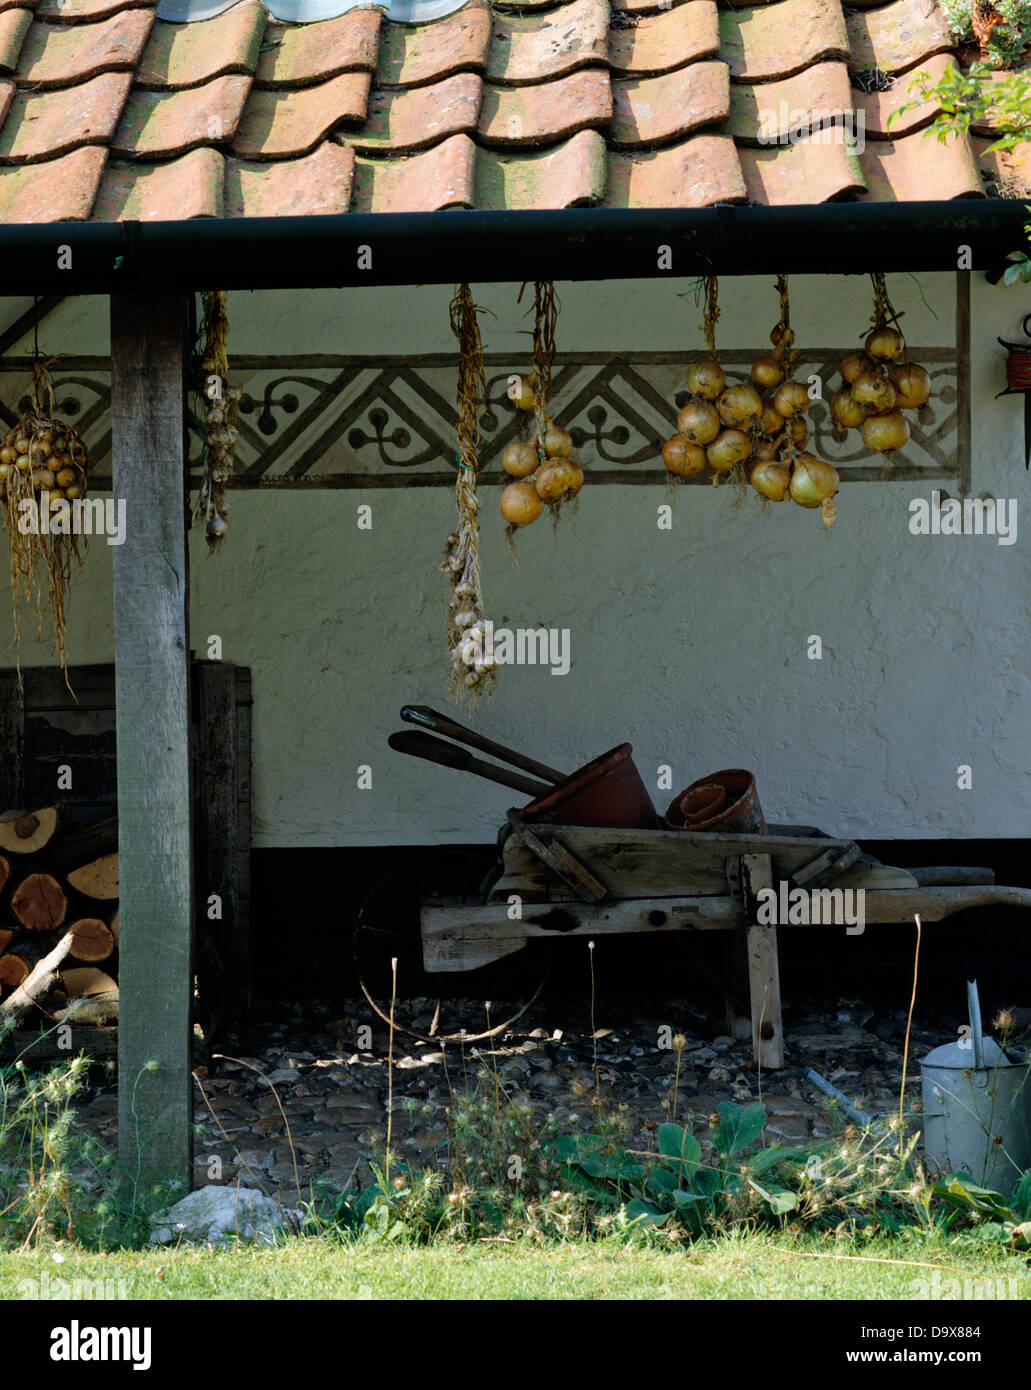 Old wooden wheelbarrow on covered veranda with onions hanging from red tiled roof Stock Photo